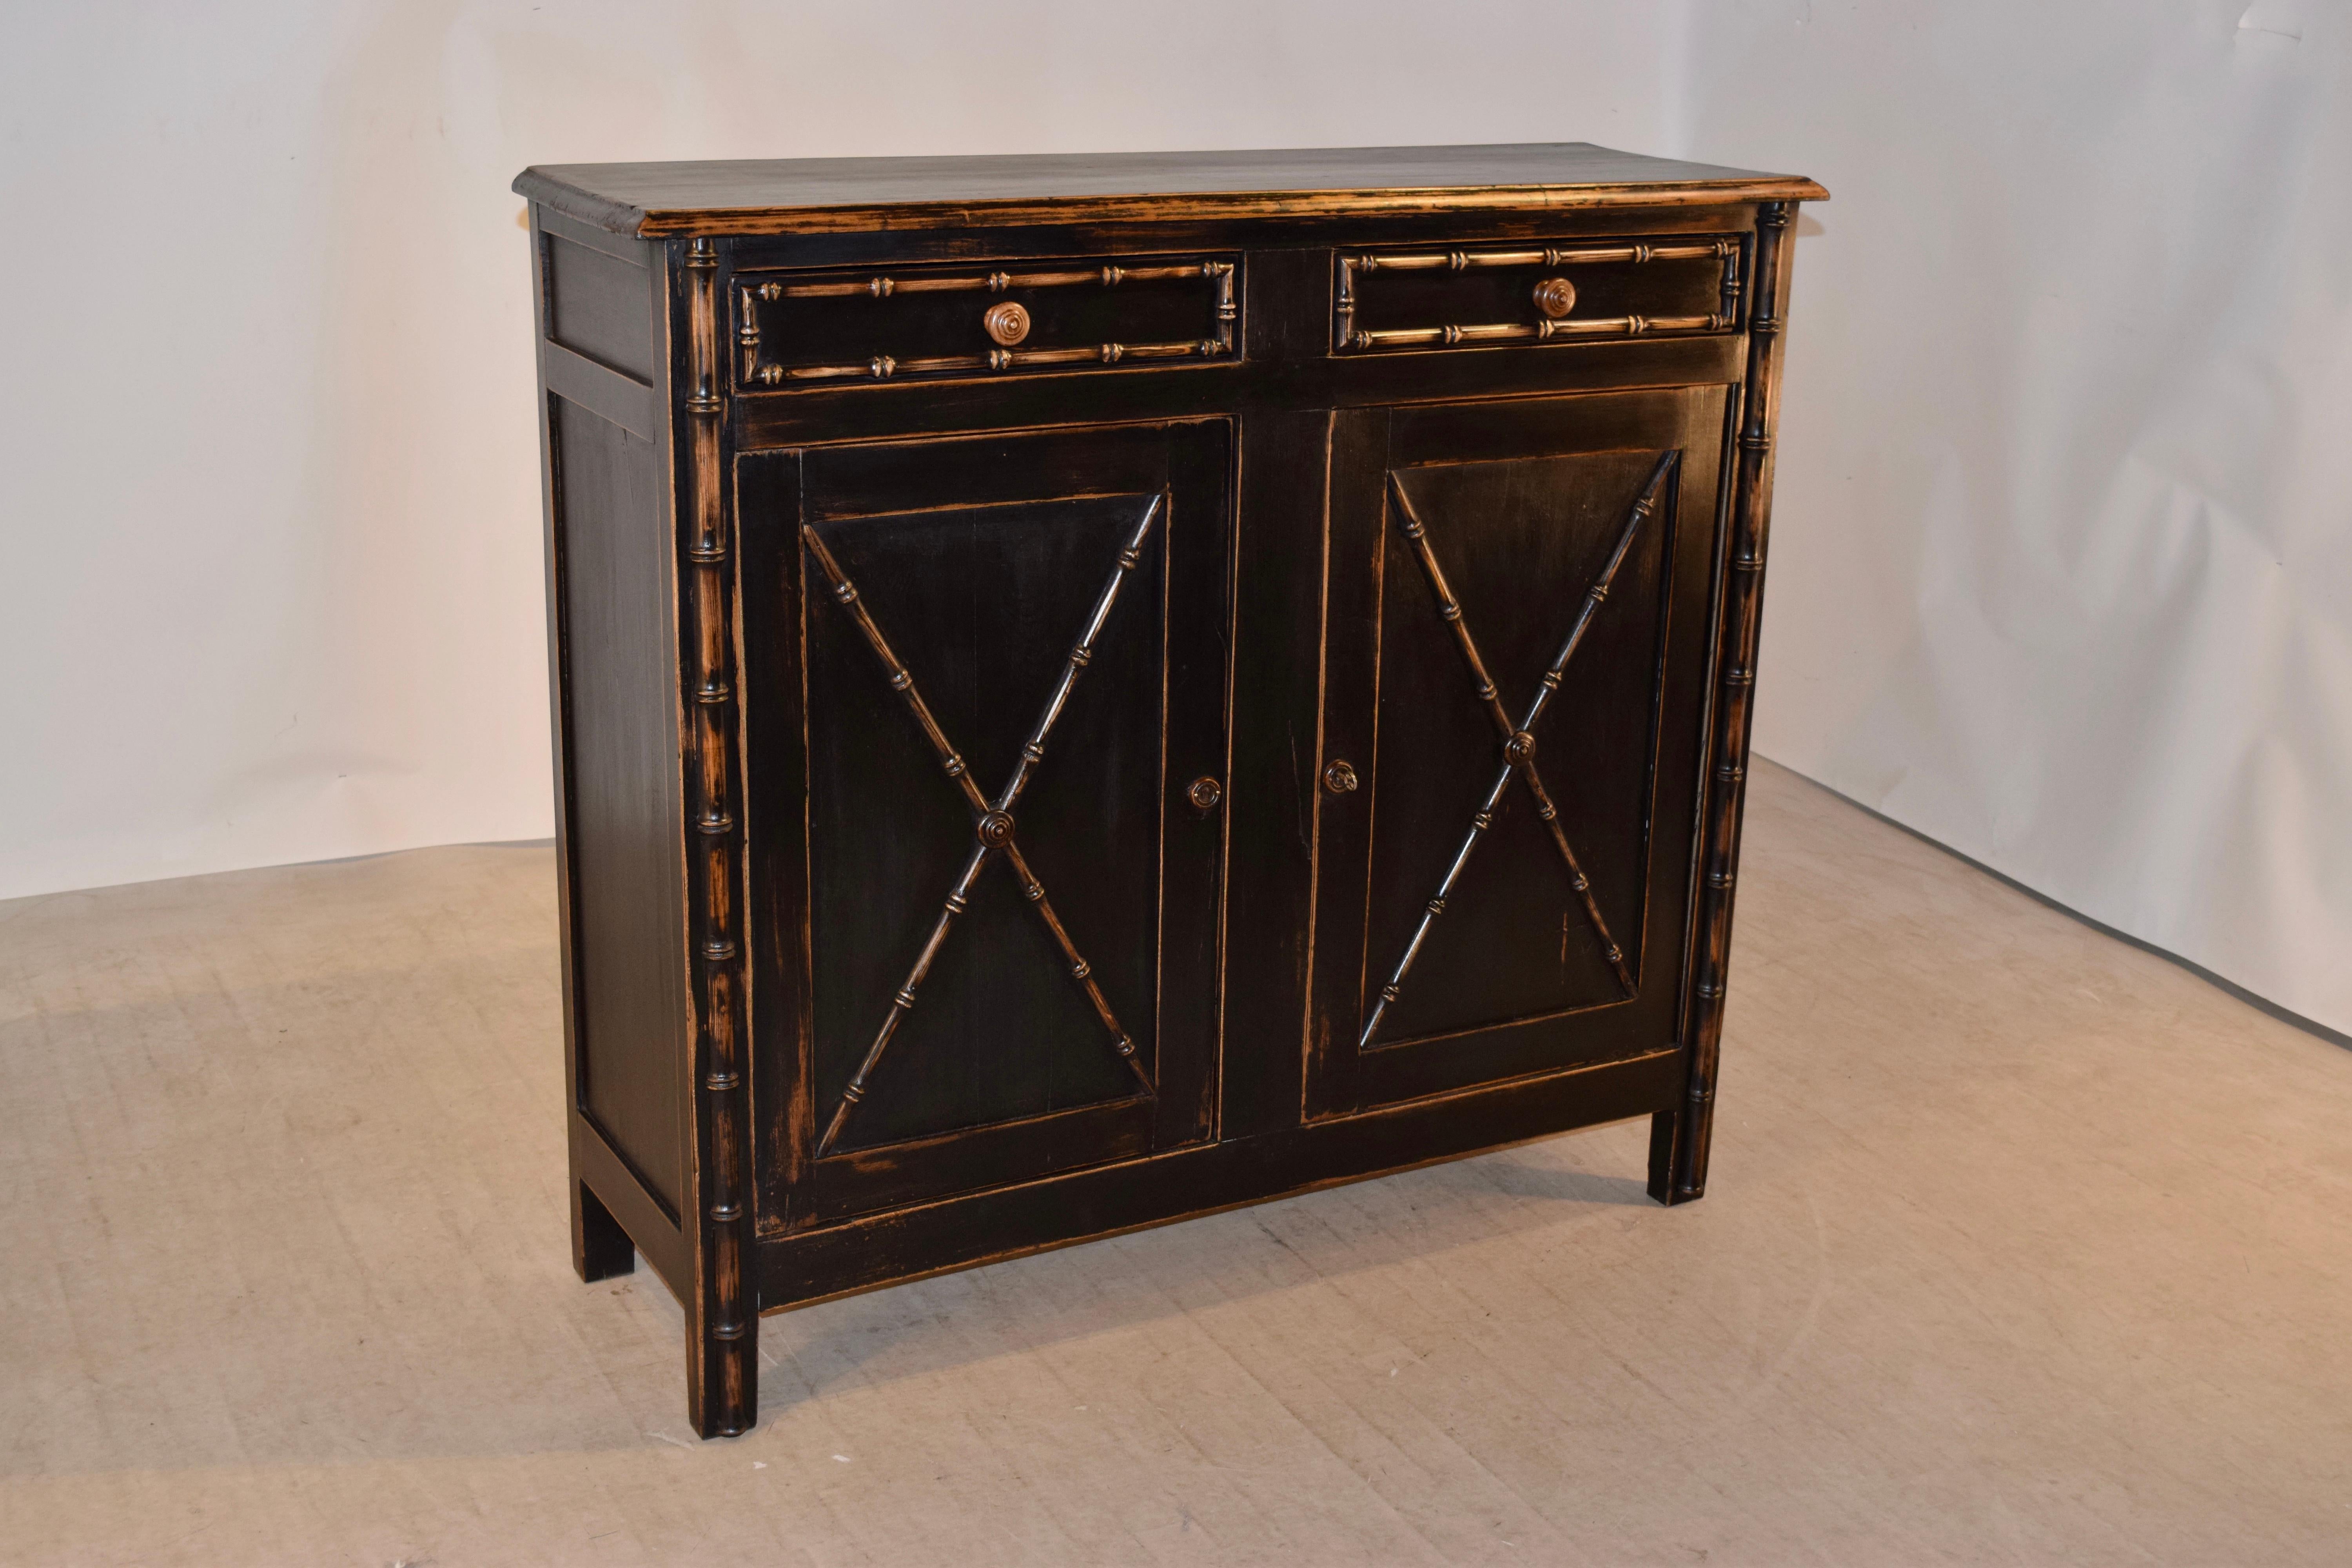 19th century painted buffet from France with a beveled edge around the top, following down to two drawers over two doors, all with faux bamboo molded decoration and flanked with faux bamboo hand-turned applied turnings as well. The sides are simply